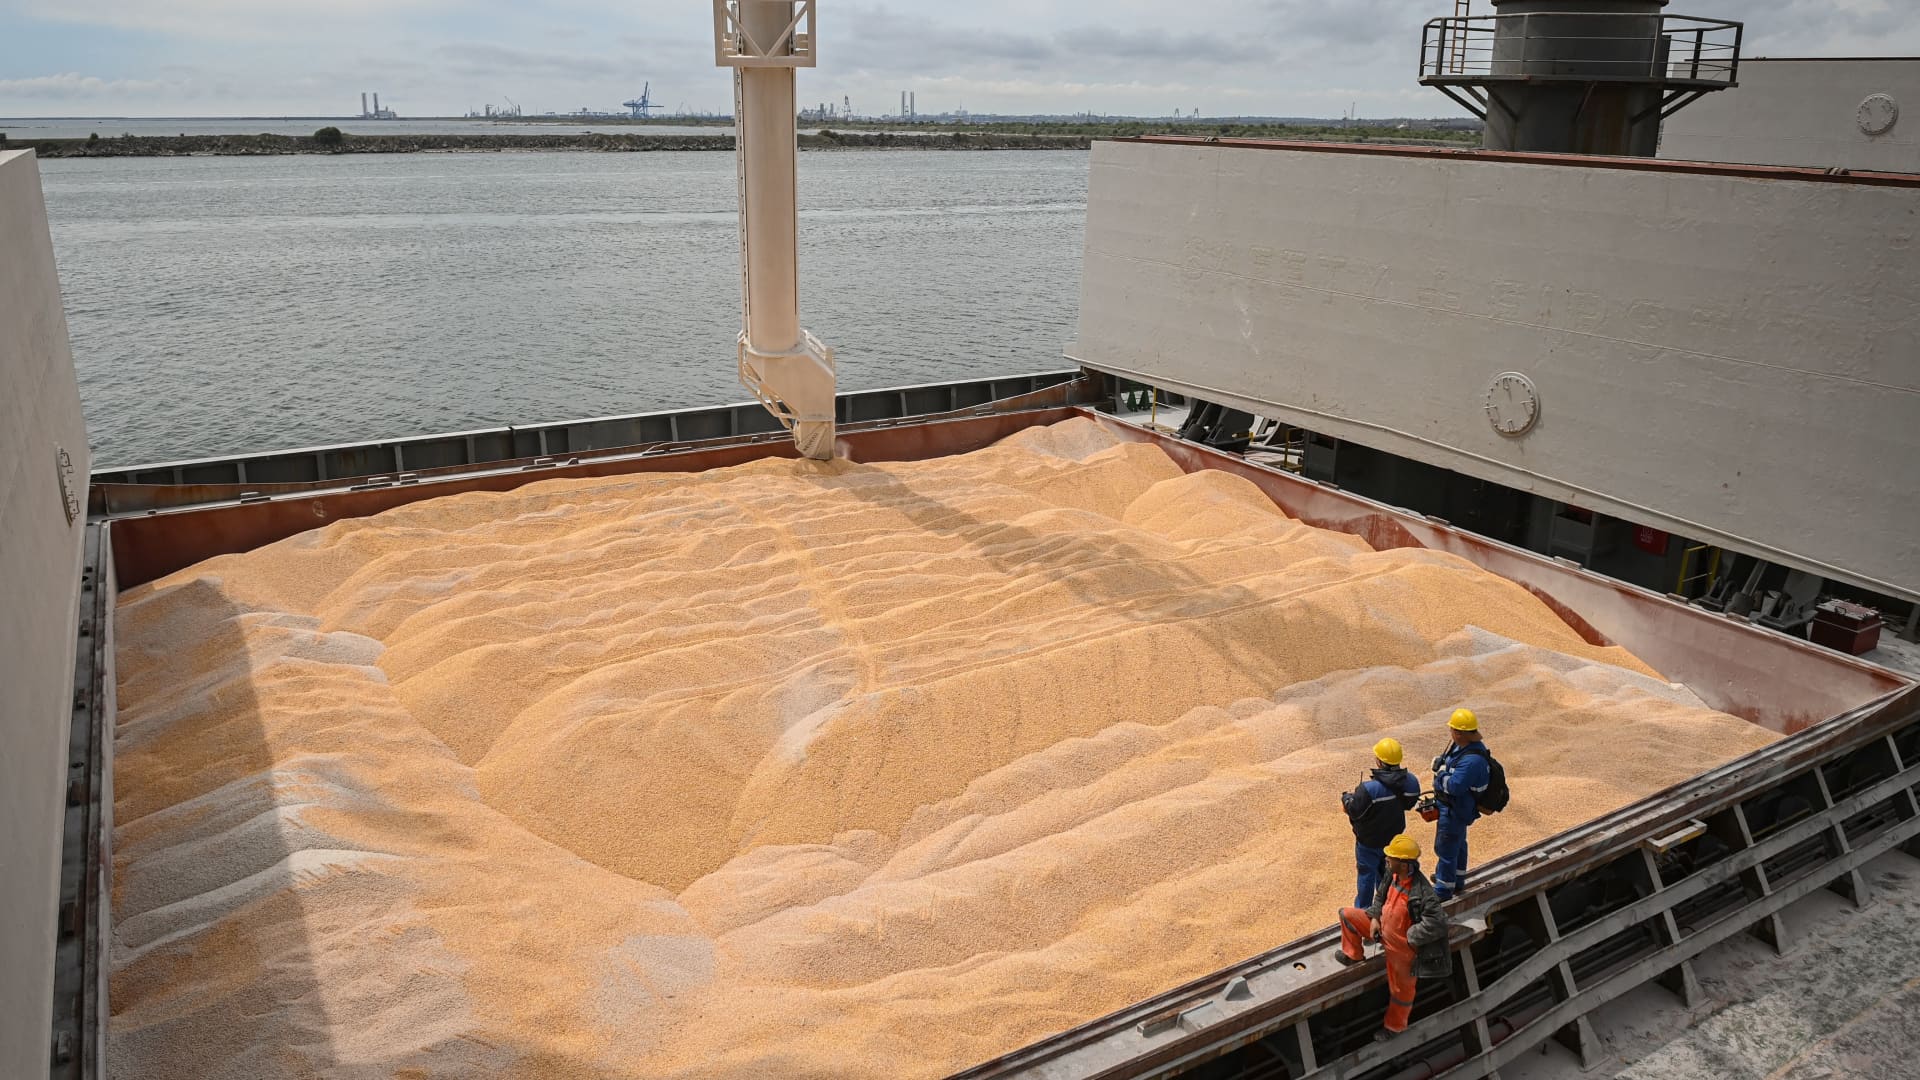 Workers assist the loading of corn on to a ship in the Black Sea port of Constanta, Romania on May 3, 2022. Russia's defense ministry is promising a safe corridor to let foreign ships leave Black Sea ports, the Associated Press reported.